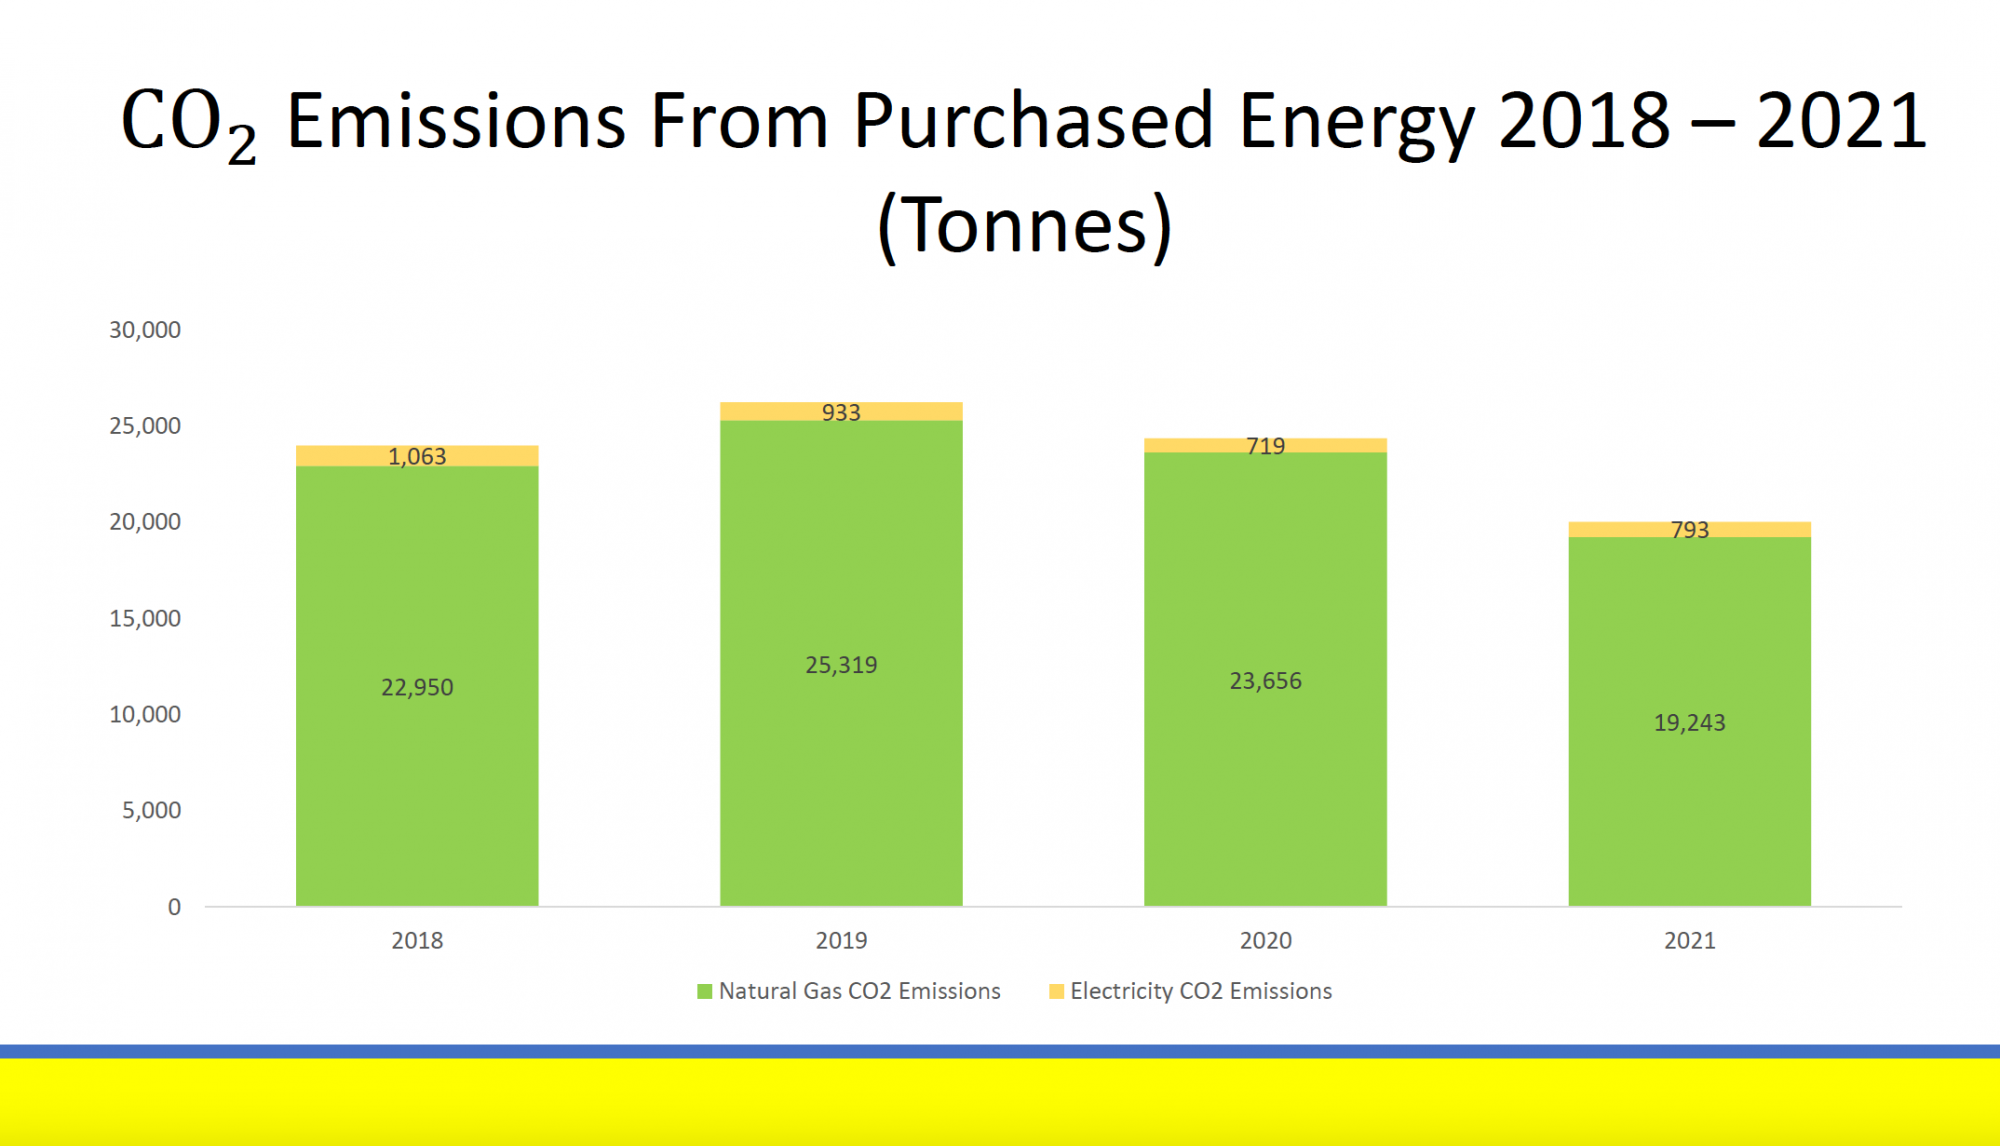 Campus CO2 emissions of purchased energy from 2018 to 2021. In 2018 electricity CO2 emissions equal 1,063 tonnes, natural gas CO2 emissions equal 22,950 tonnes. In 2019 electricity CO2 emissions equal 933 tonnes, natural gas CO2 emissions equal 25,319 tonnes. In 2020 electricity CO2 emissions equal 719 tonnes, natural gas CO2 emissions equal 23,656 tonnes. In 2021, electricity CO2 emissions equal 793 tonnes, natural gas CO2 emissions equal 19,243 tonnes.